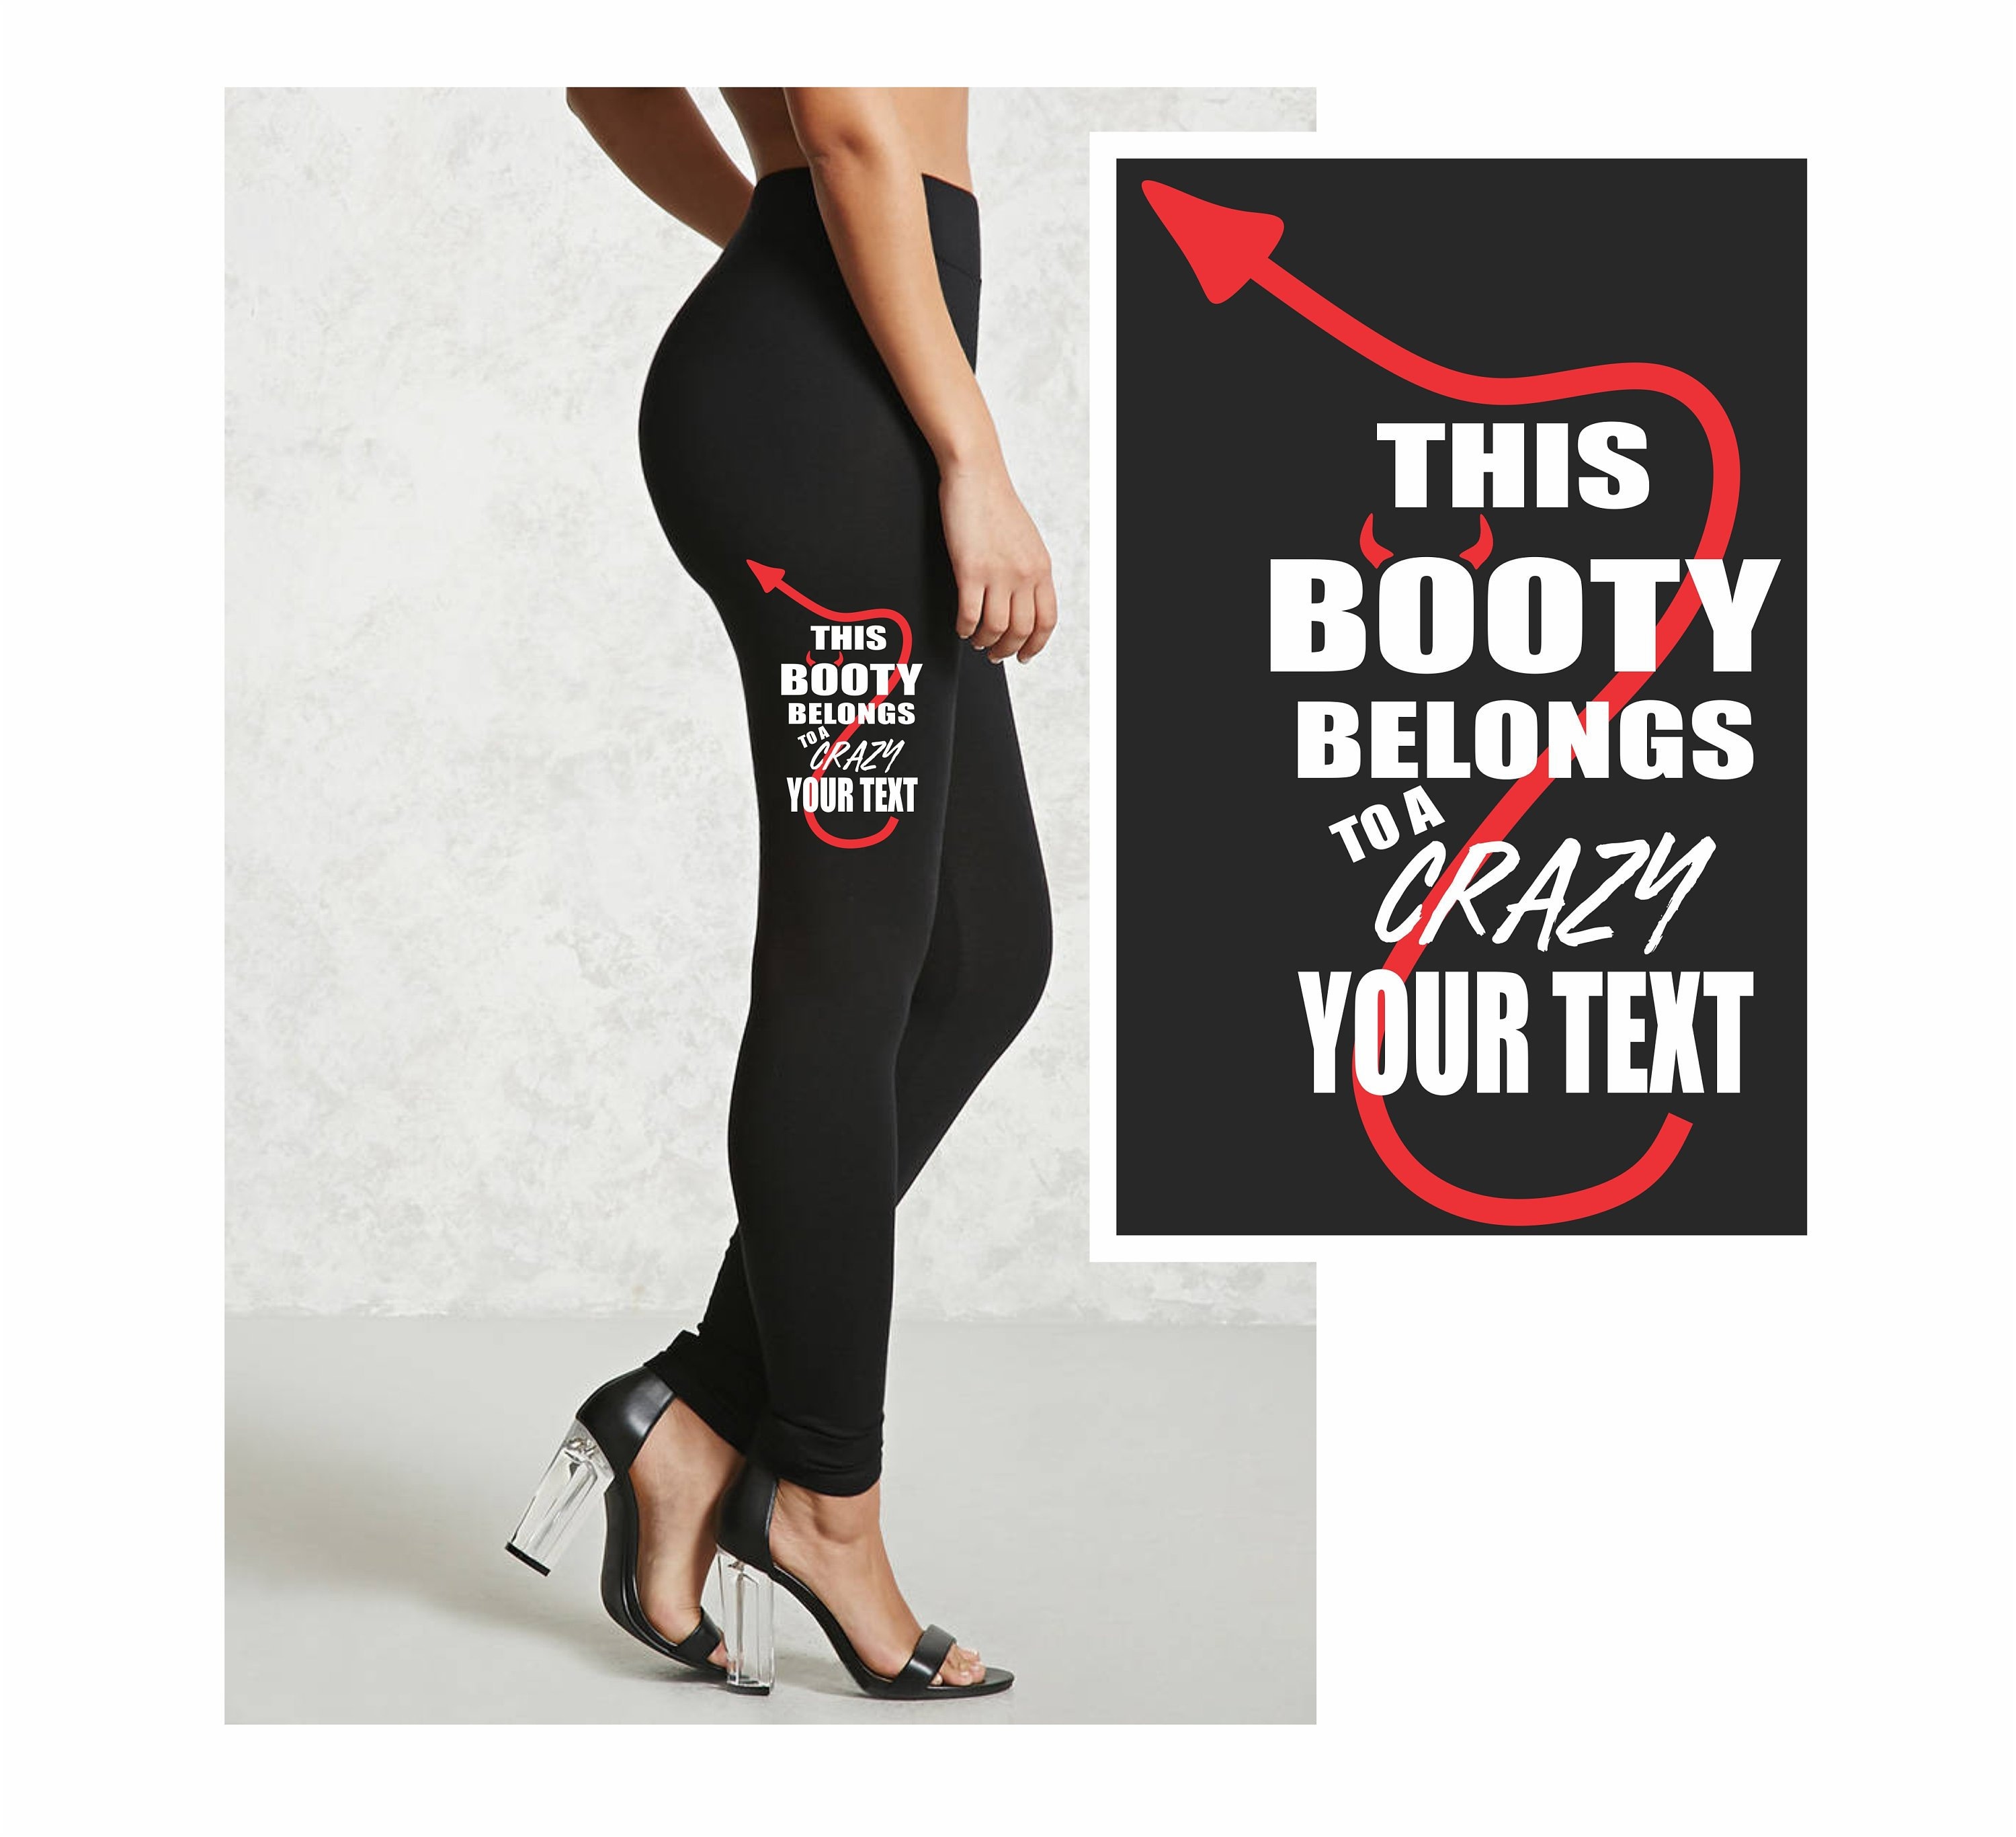 This BOOTY Belongs to A Crazy YOUR TEXT Leggings Black Pant photo picture